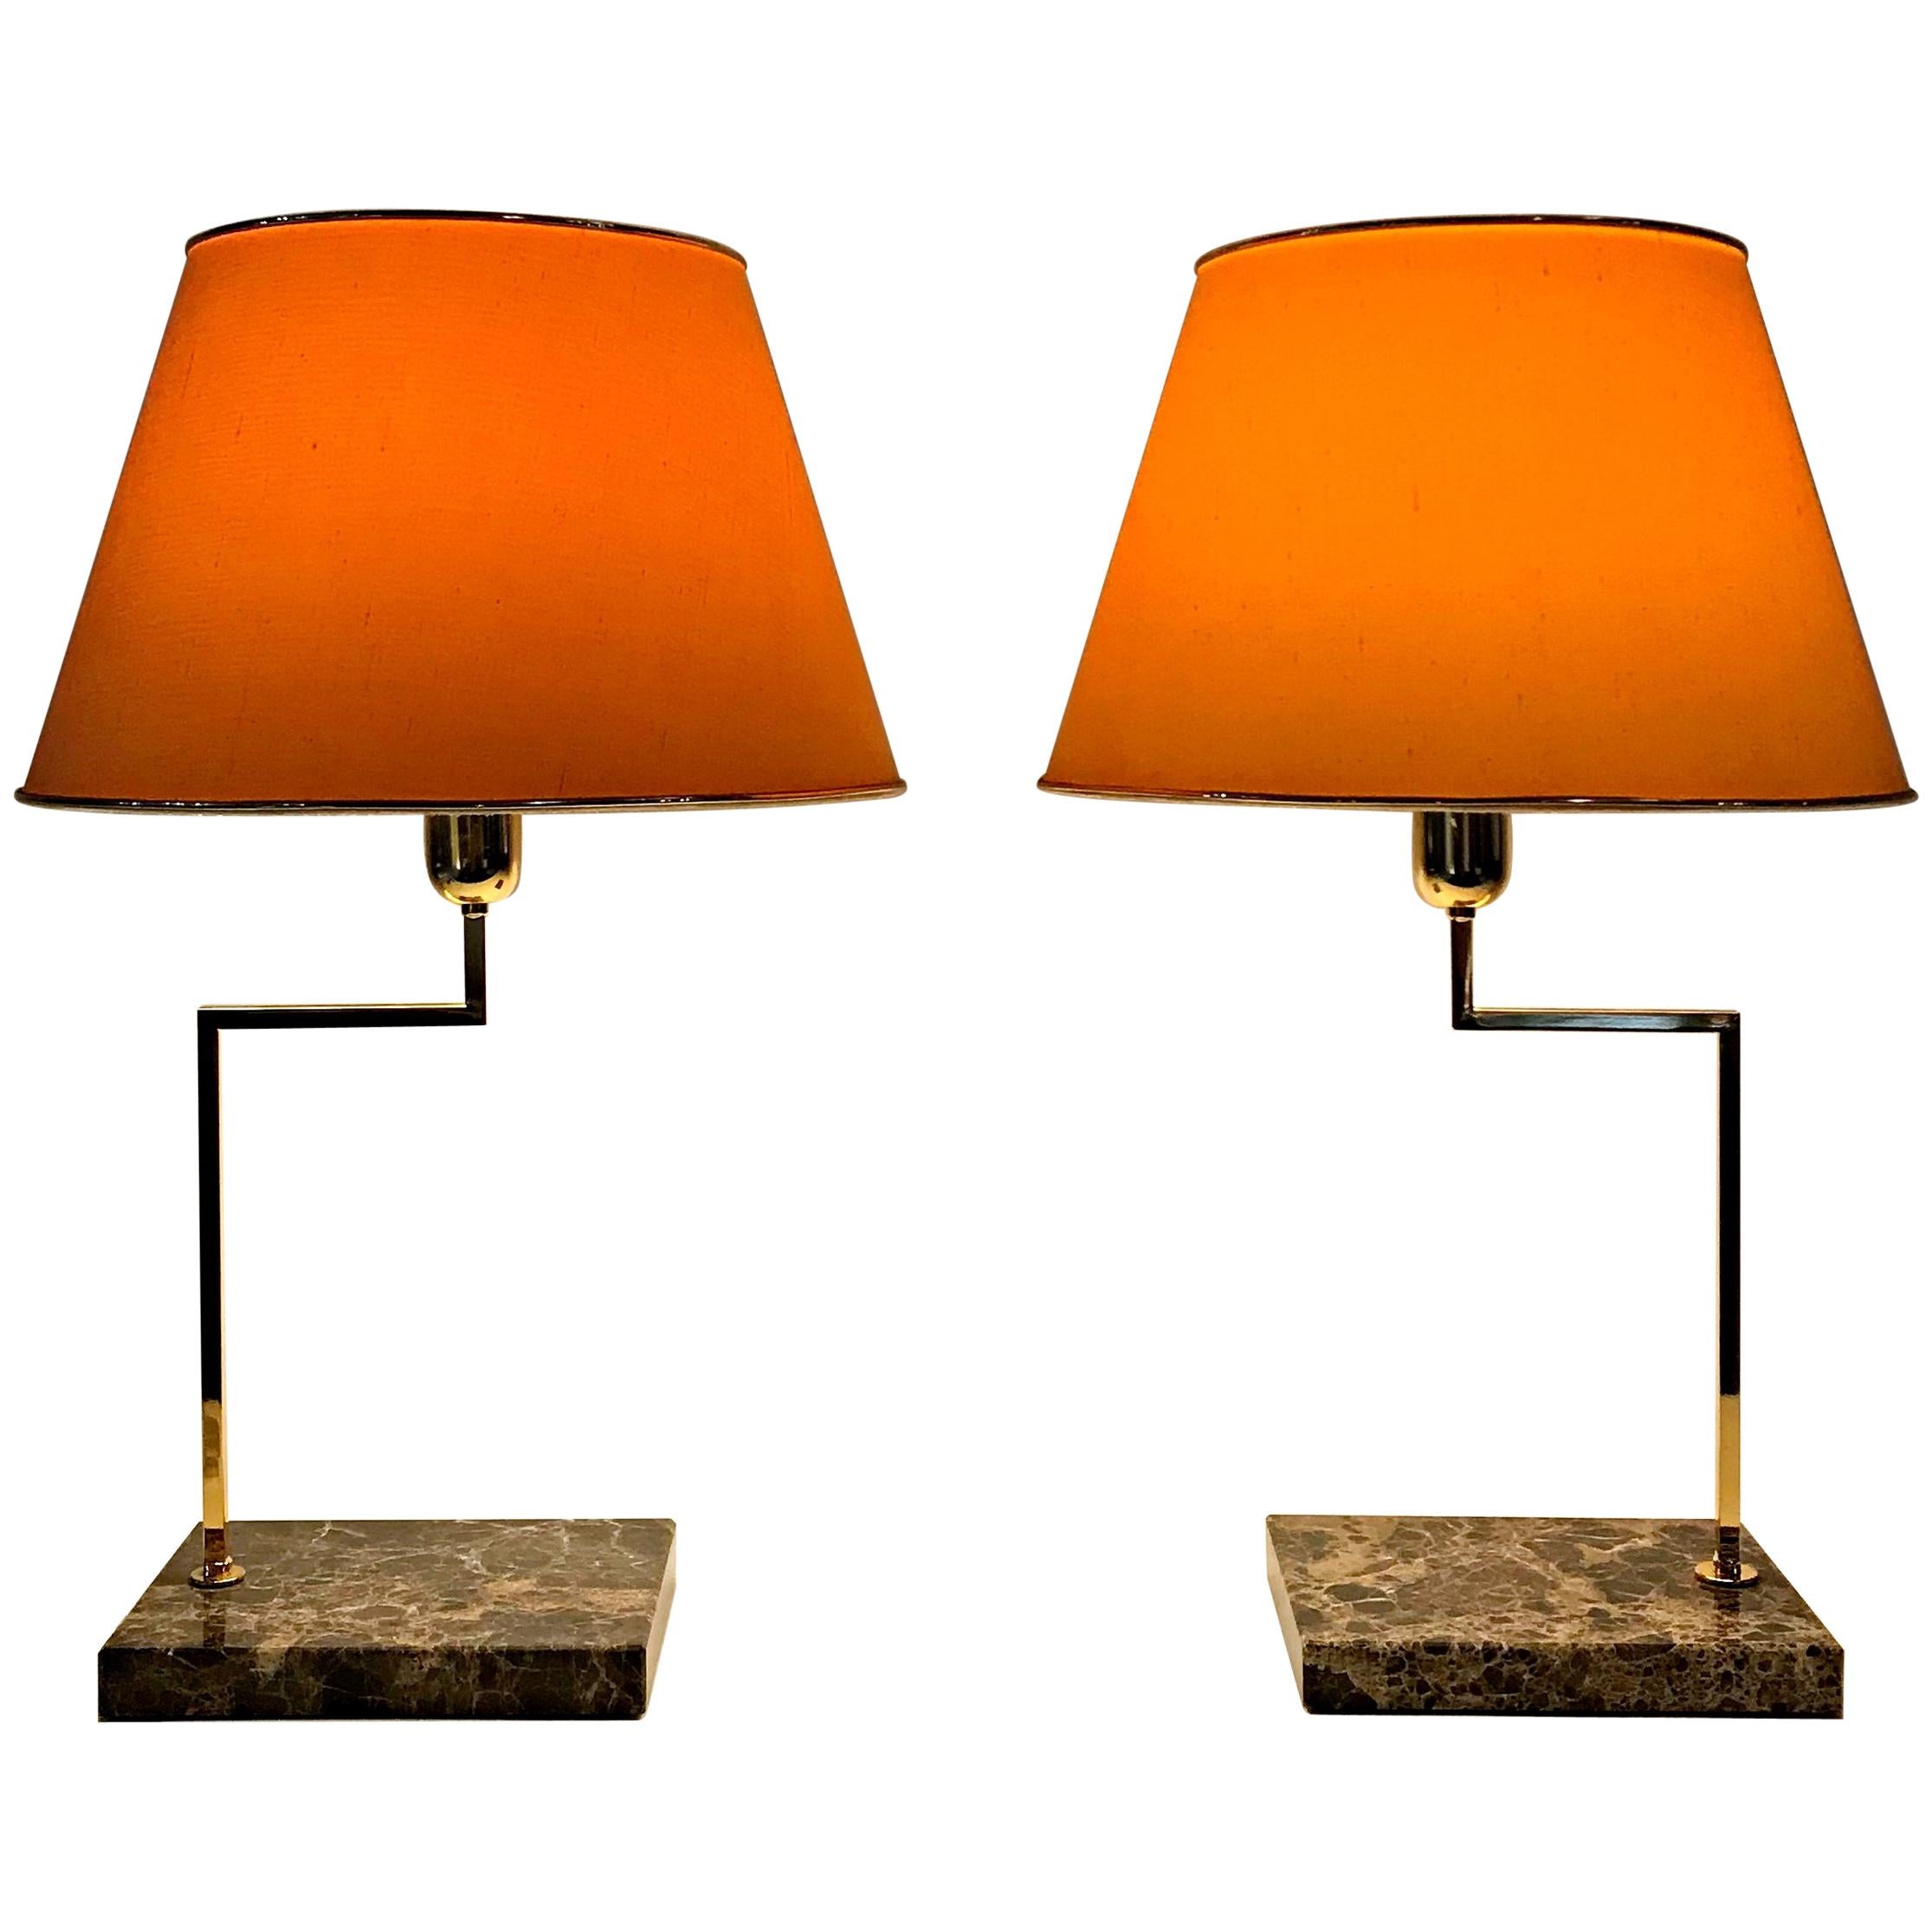 Elegant Midcentury Marble and Brass Table Lamps with Orange Shades, Italy, 1970s